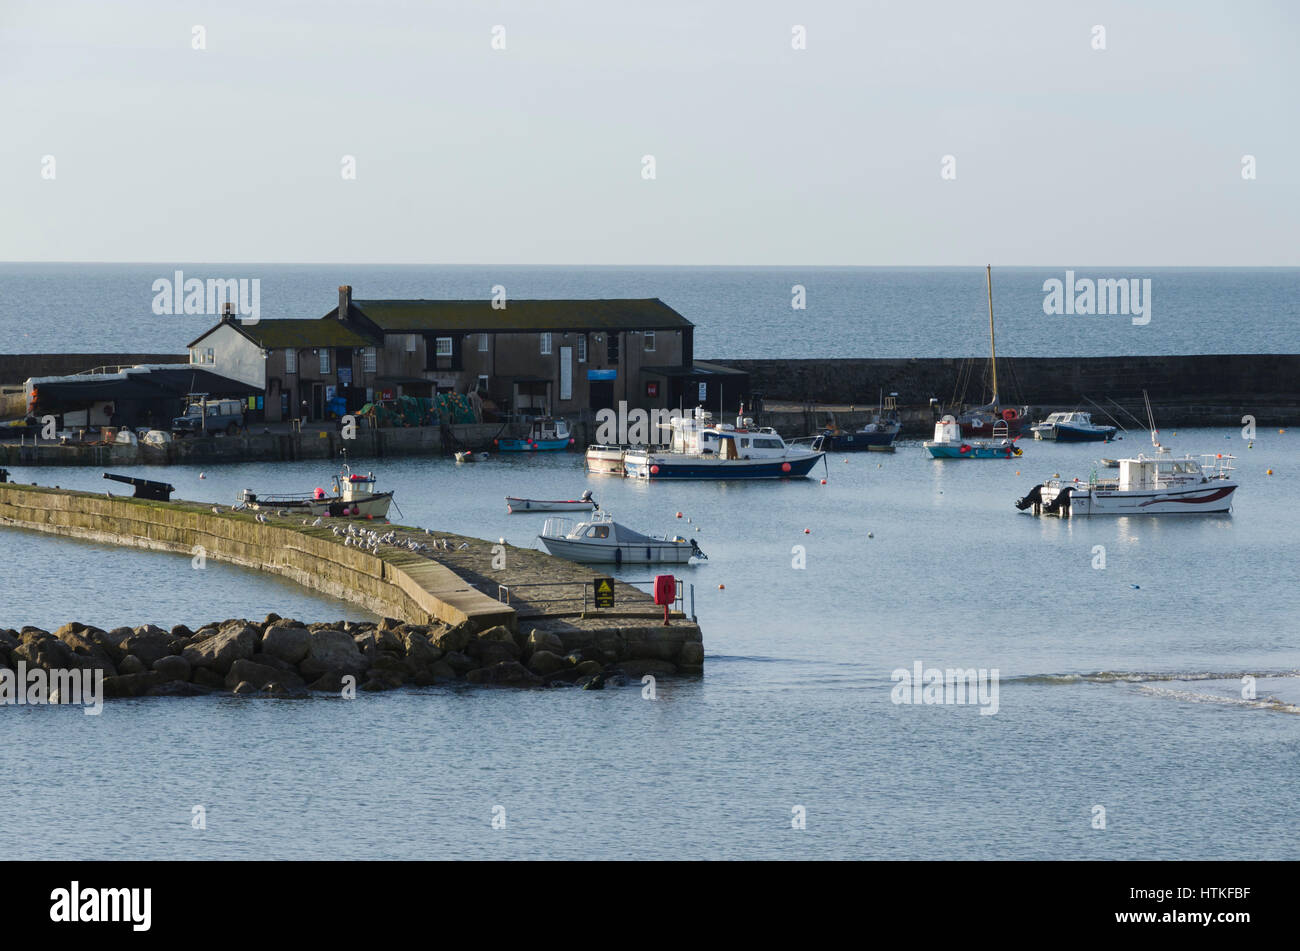 Lyme Regis, Dorset, UK.  13th March 2017.  UK Weather. Beautiful warm spring sunshine and blues skies during the morning at the seaside resort of Lyme Regis on the Dorset Jurassic Coast.  The view is of the Cobb harbour.  Photo by Graham Hunt/Alamy Live News Stock Photo